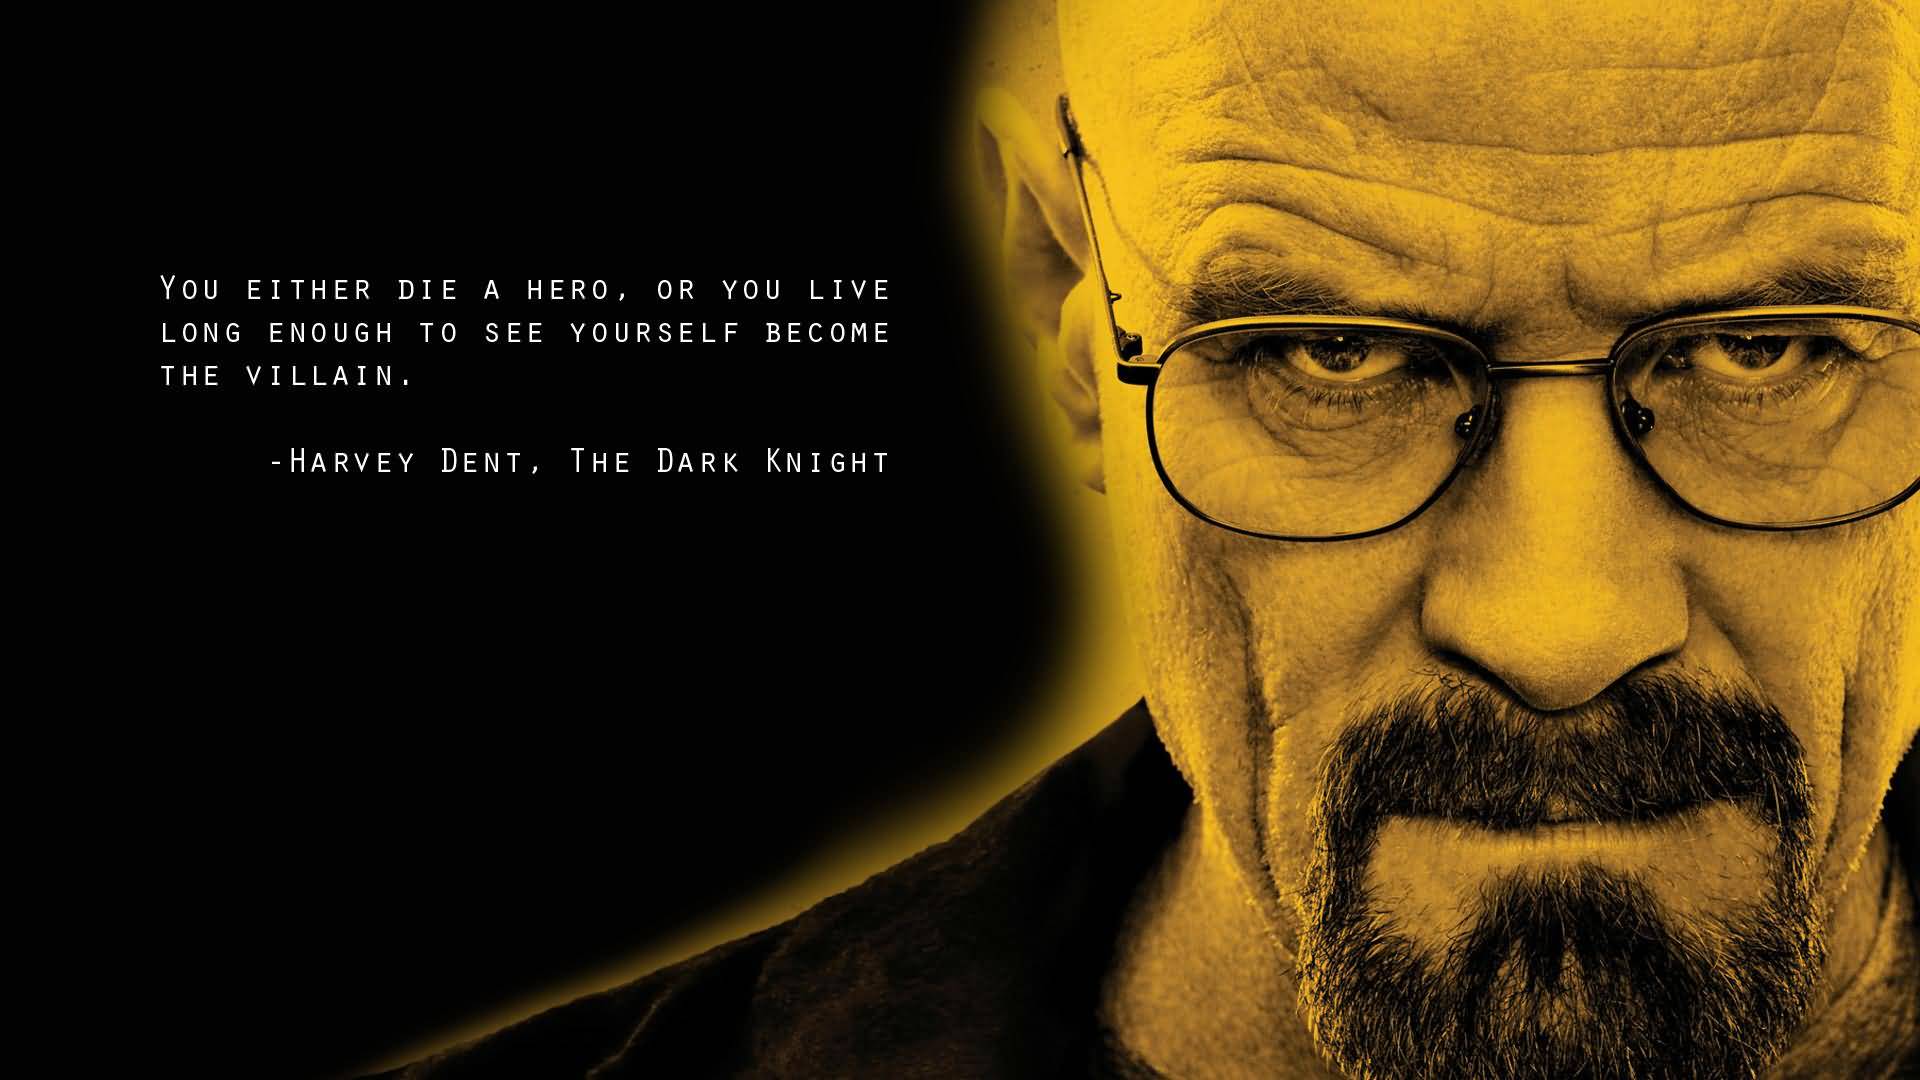 Popular Movie Quotes, Sayings, Memes, Image & Wallpaper